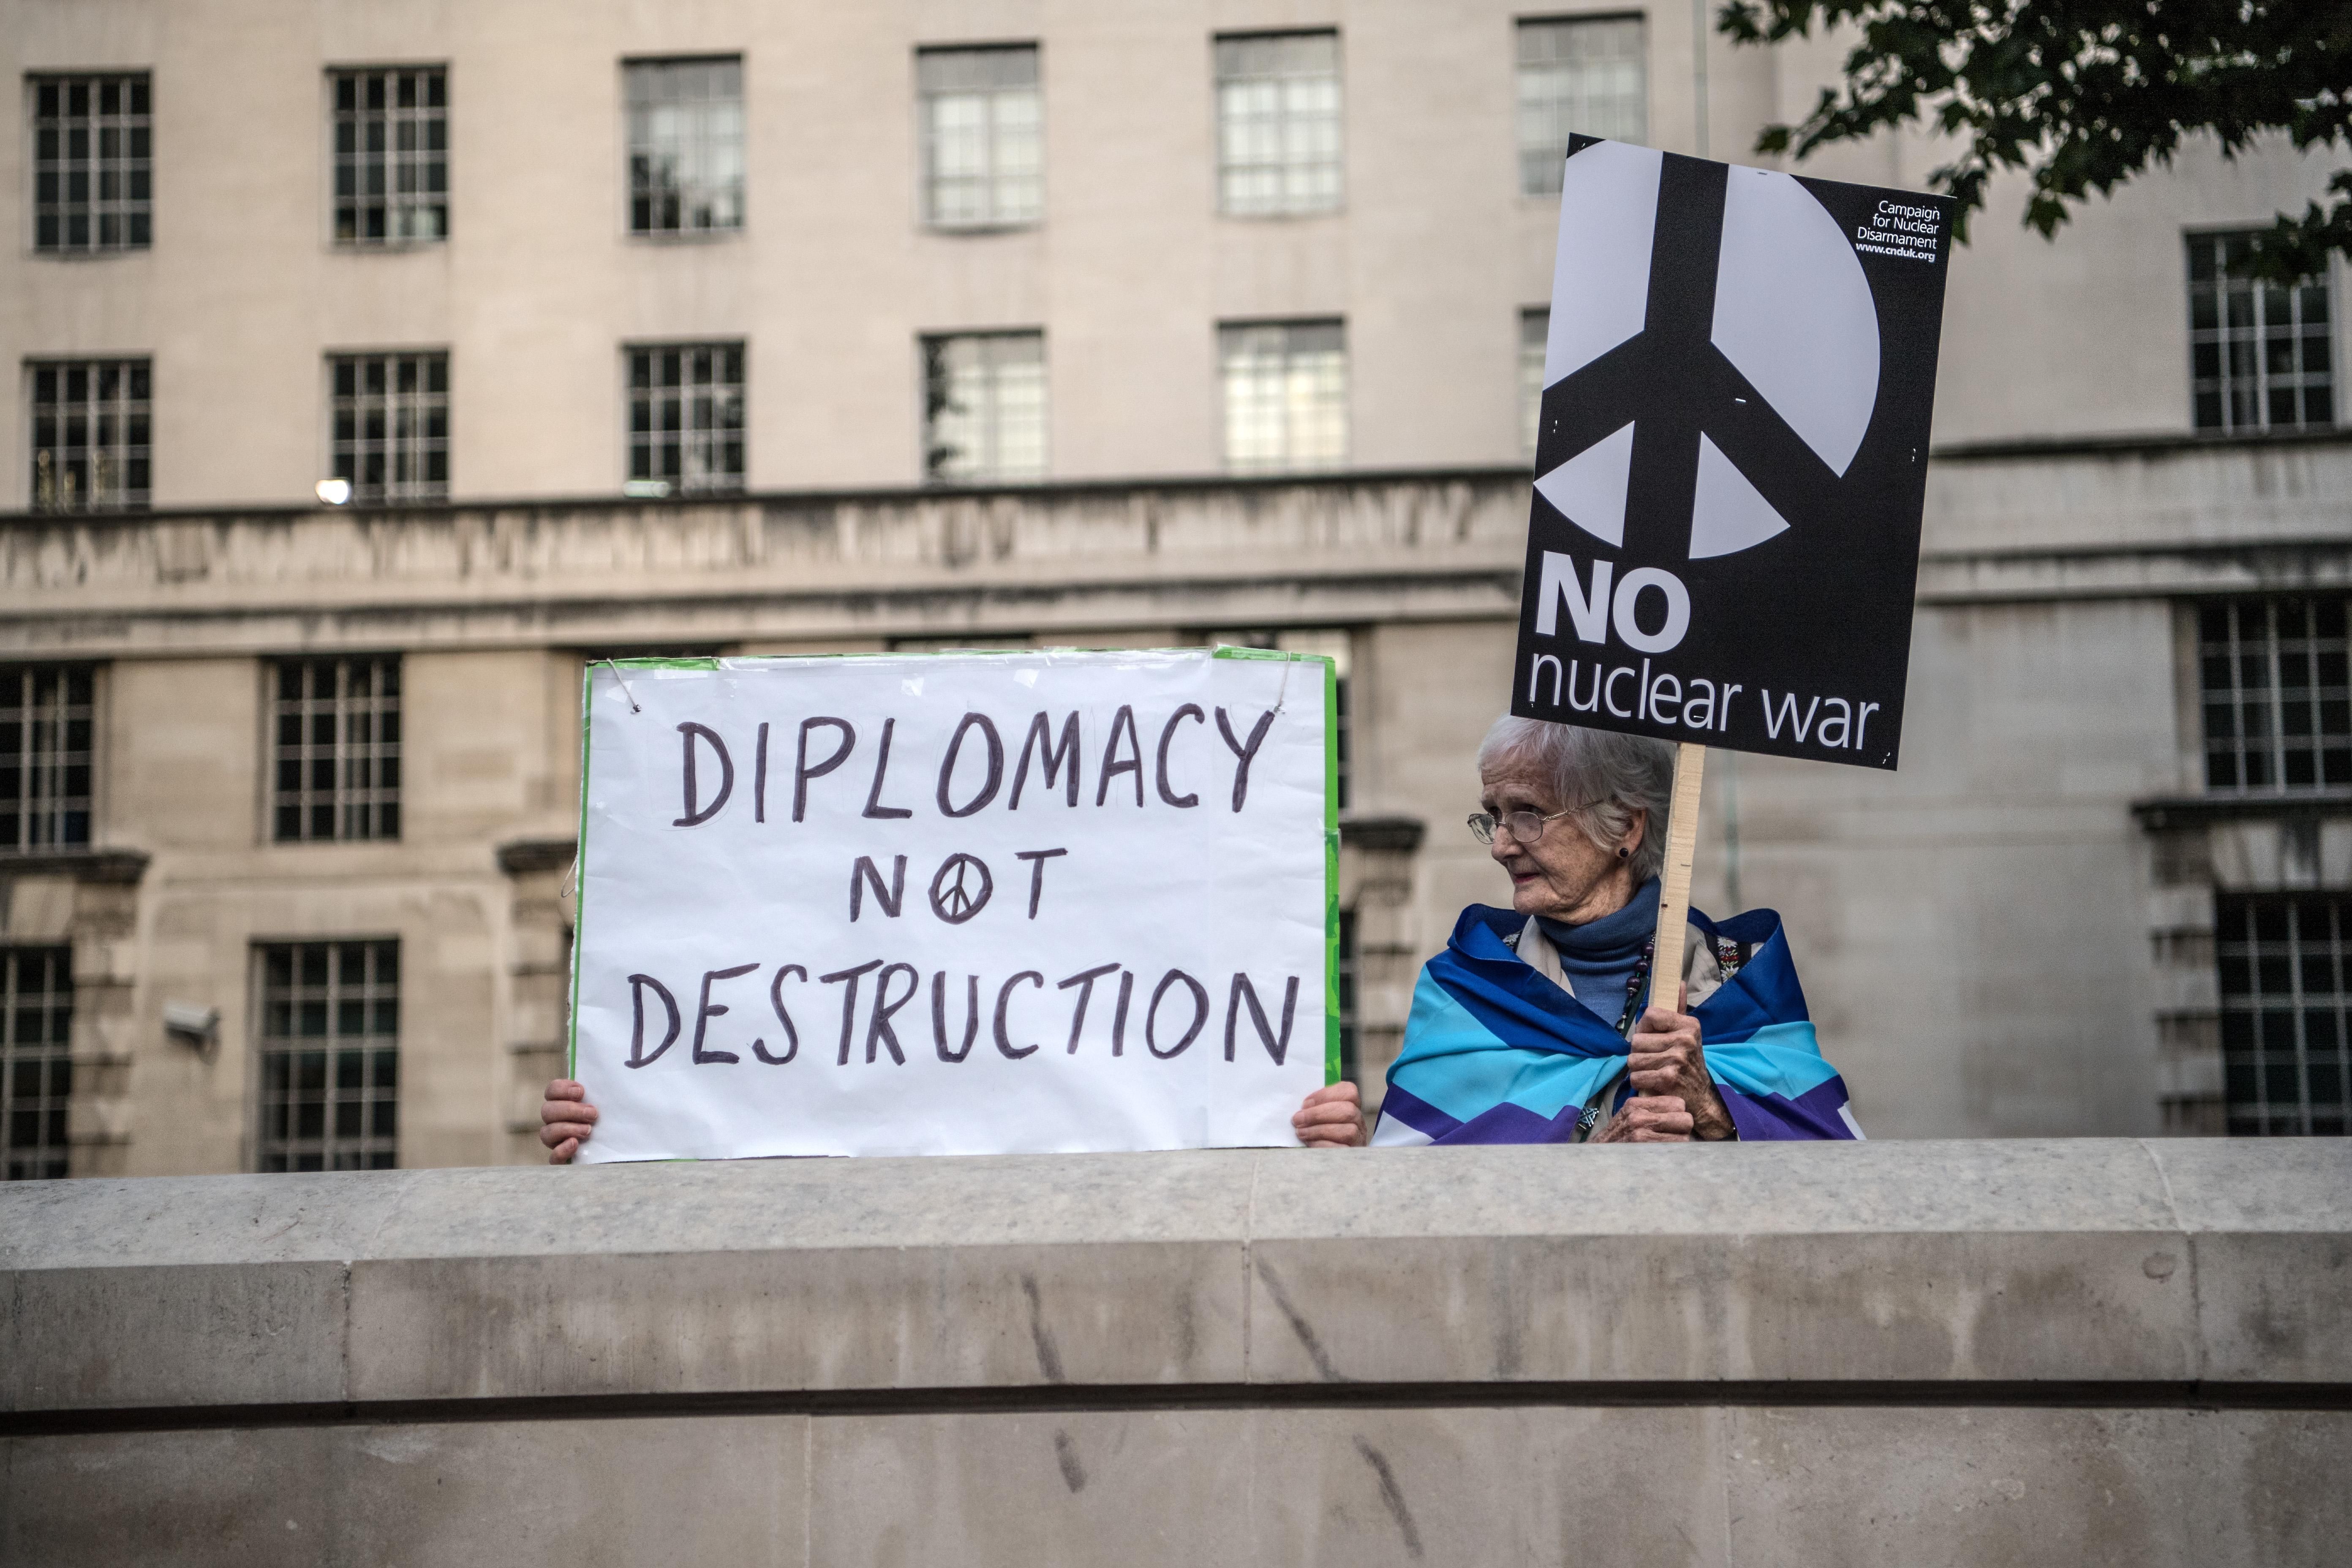 Signs read "Diplomacy Not Destruction" and "No Nuclear War"